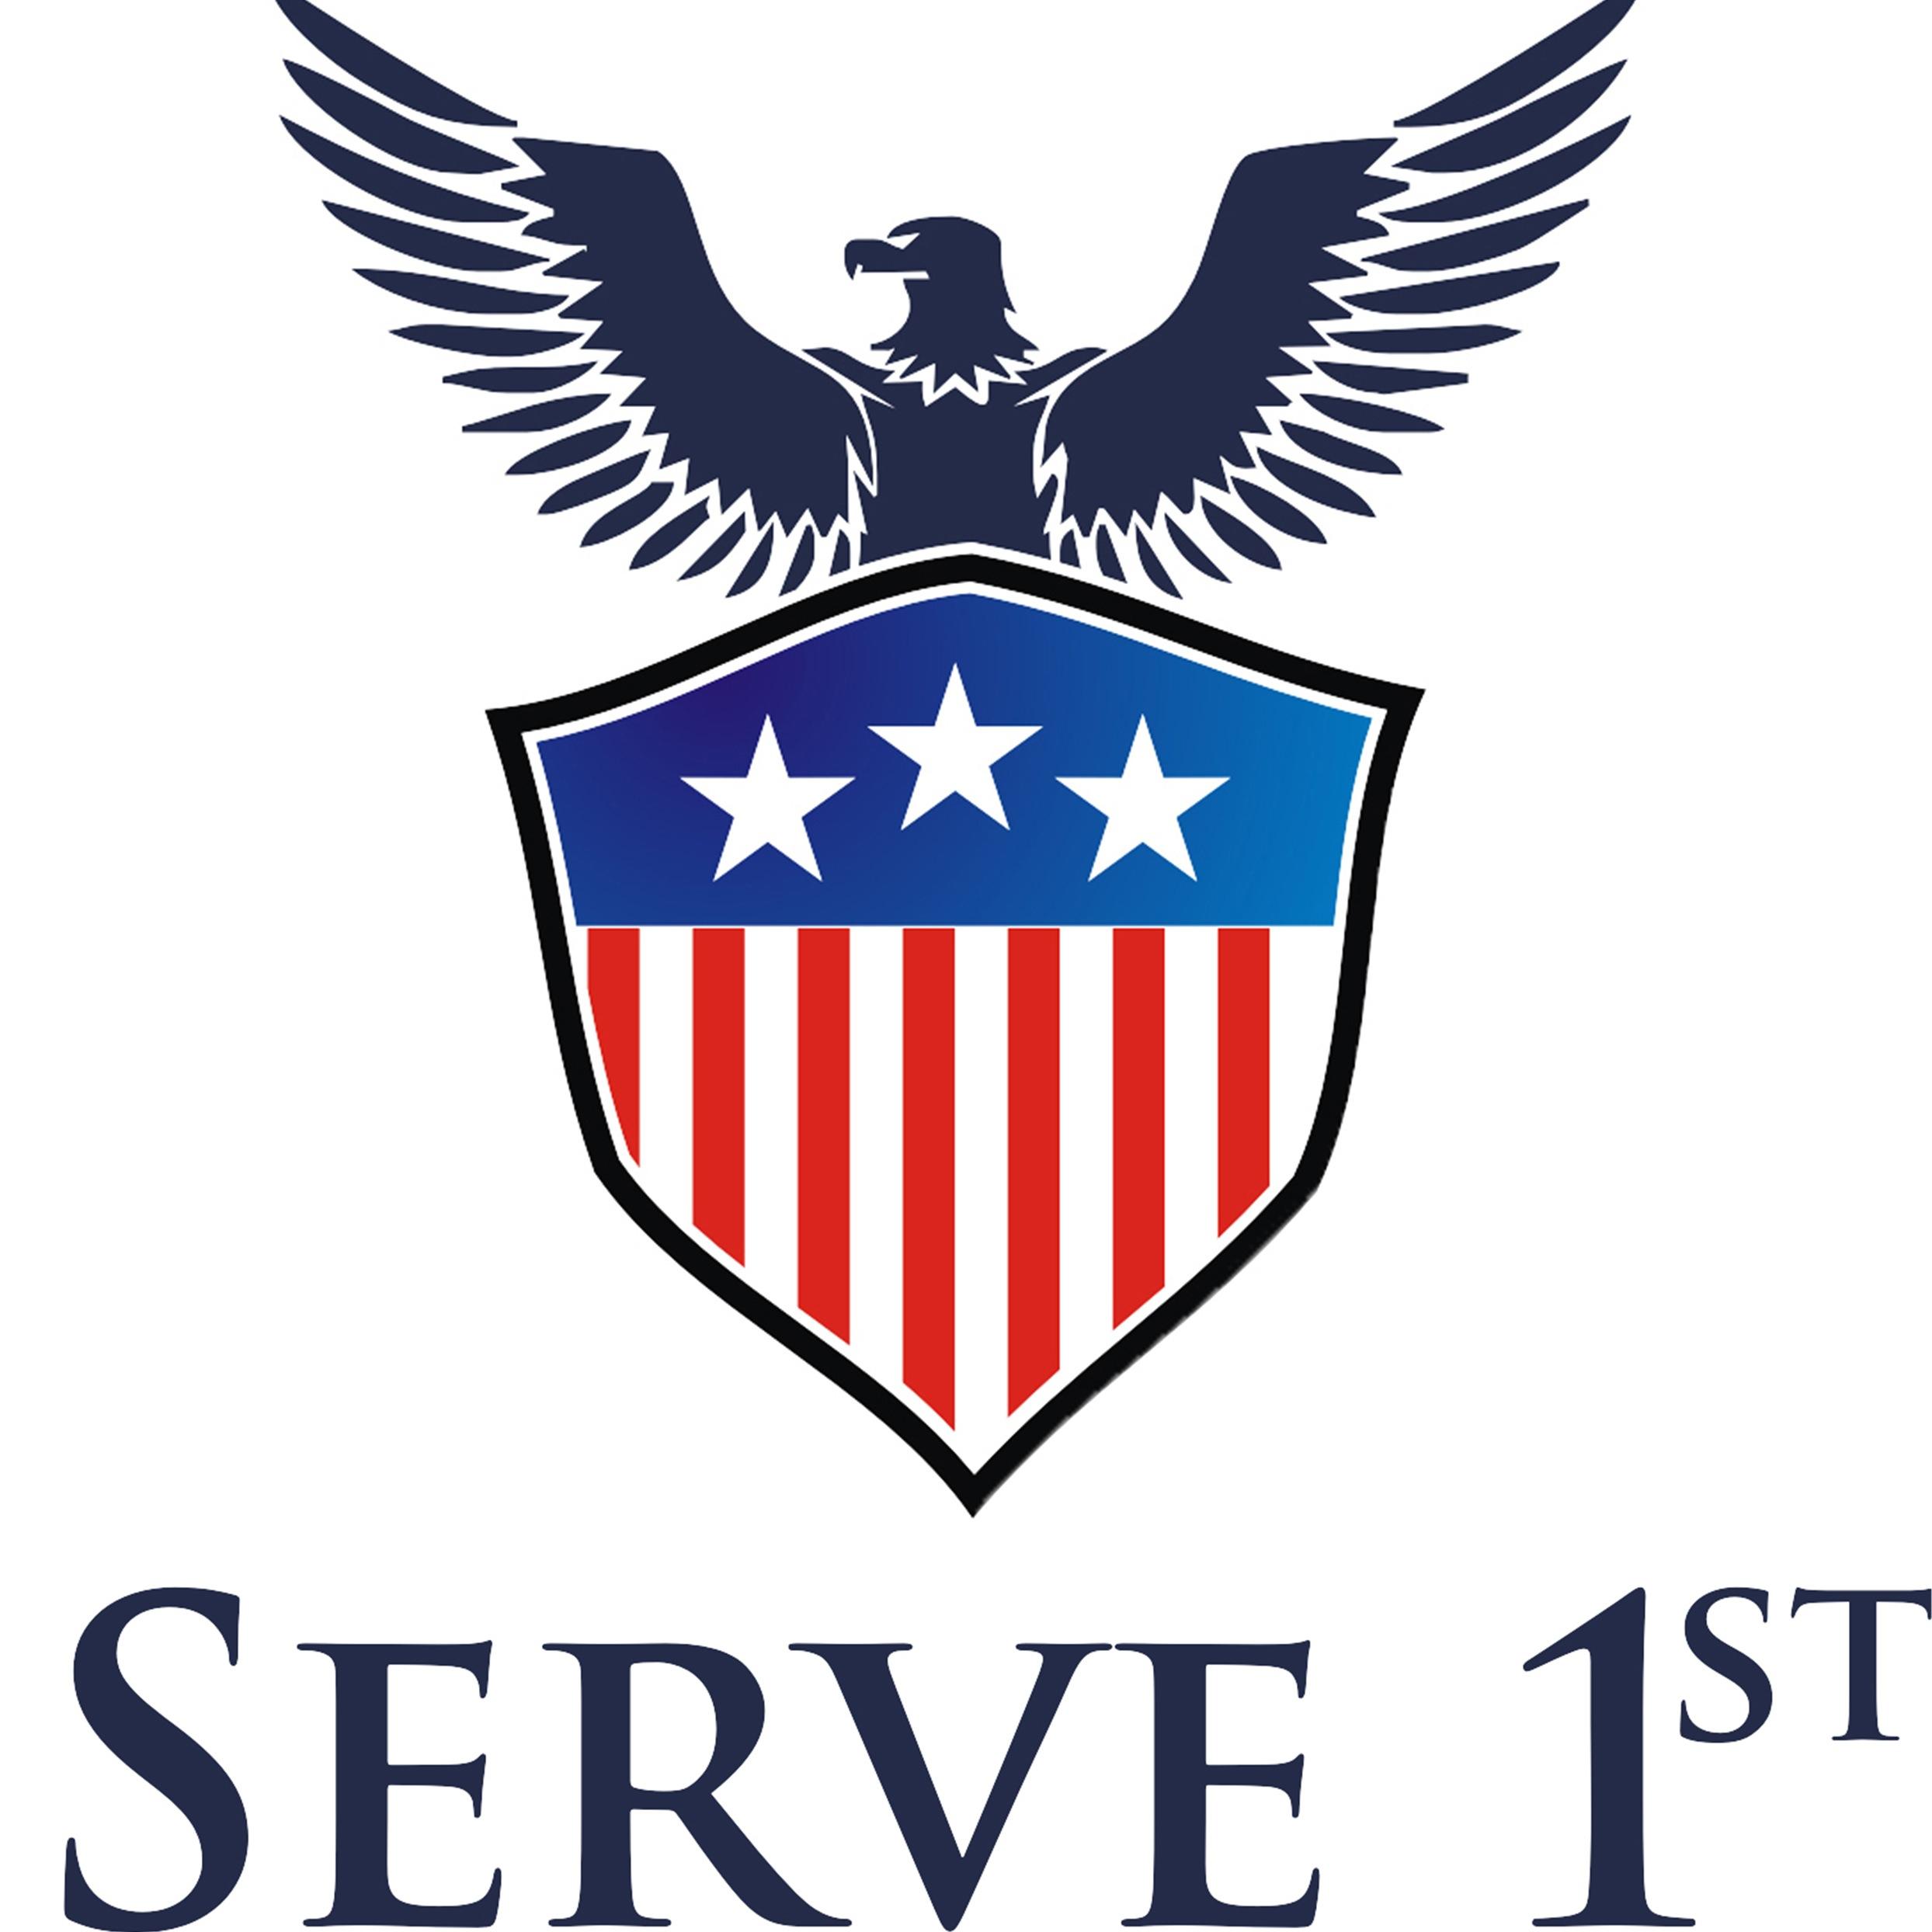 We are a post 9/11 veteran co-founded and veteran staffed merchant service provider.
We aim to bring the integrity of the armed forces into payment processing.